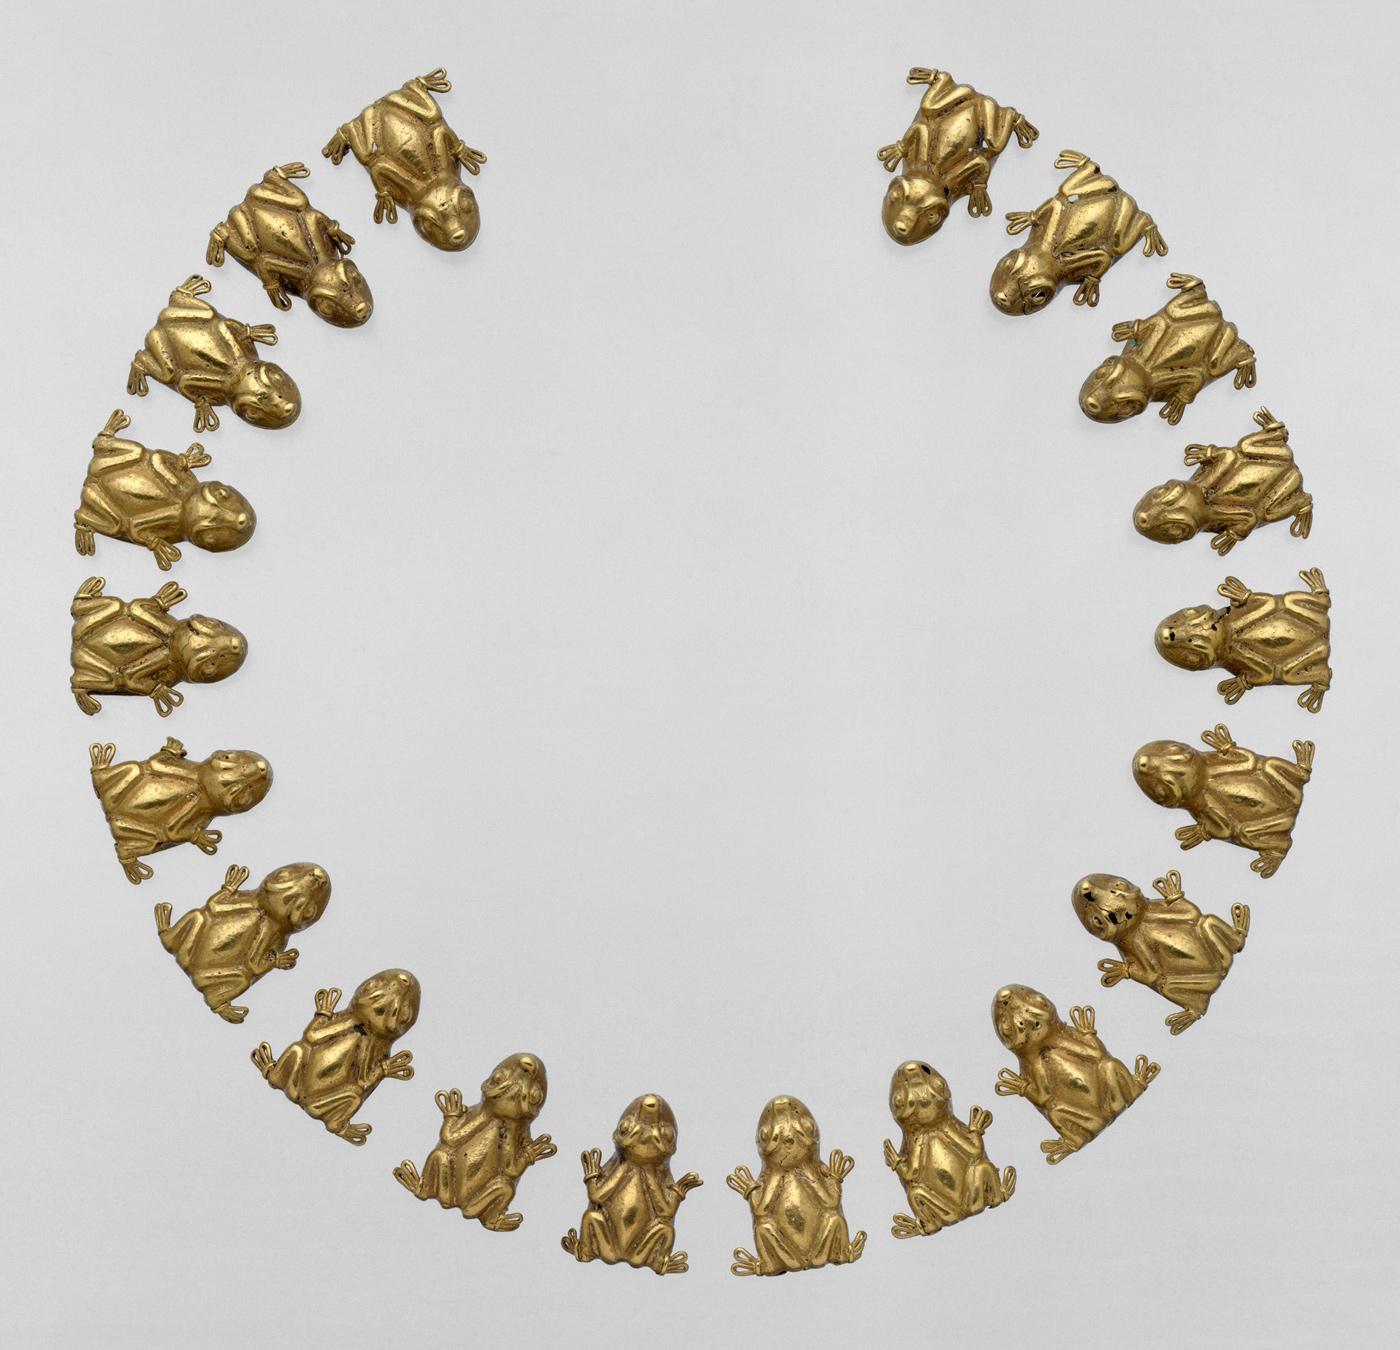 Gold necklace beads shaped like little frogs. Mexico, Aztec or Mixtec civilization, 15th-16th century.jpeg